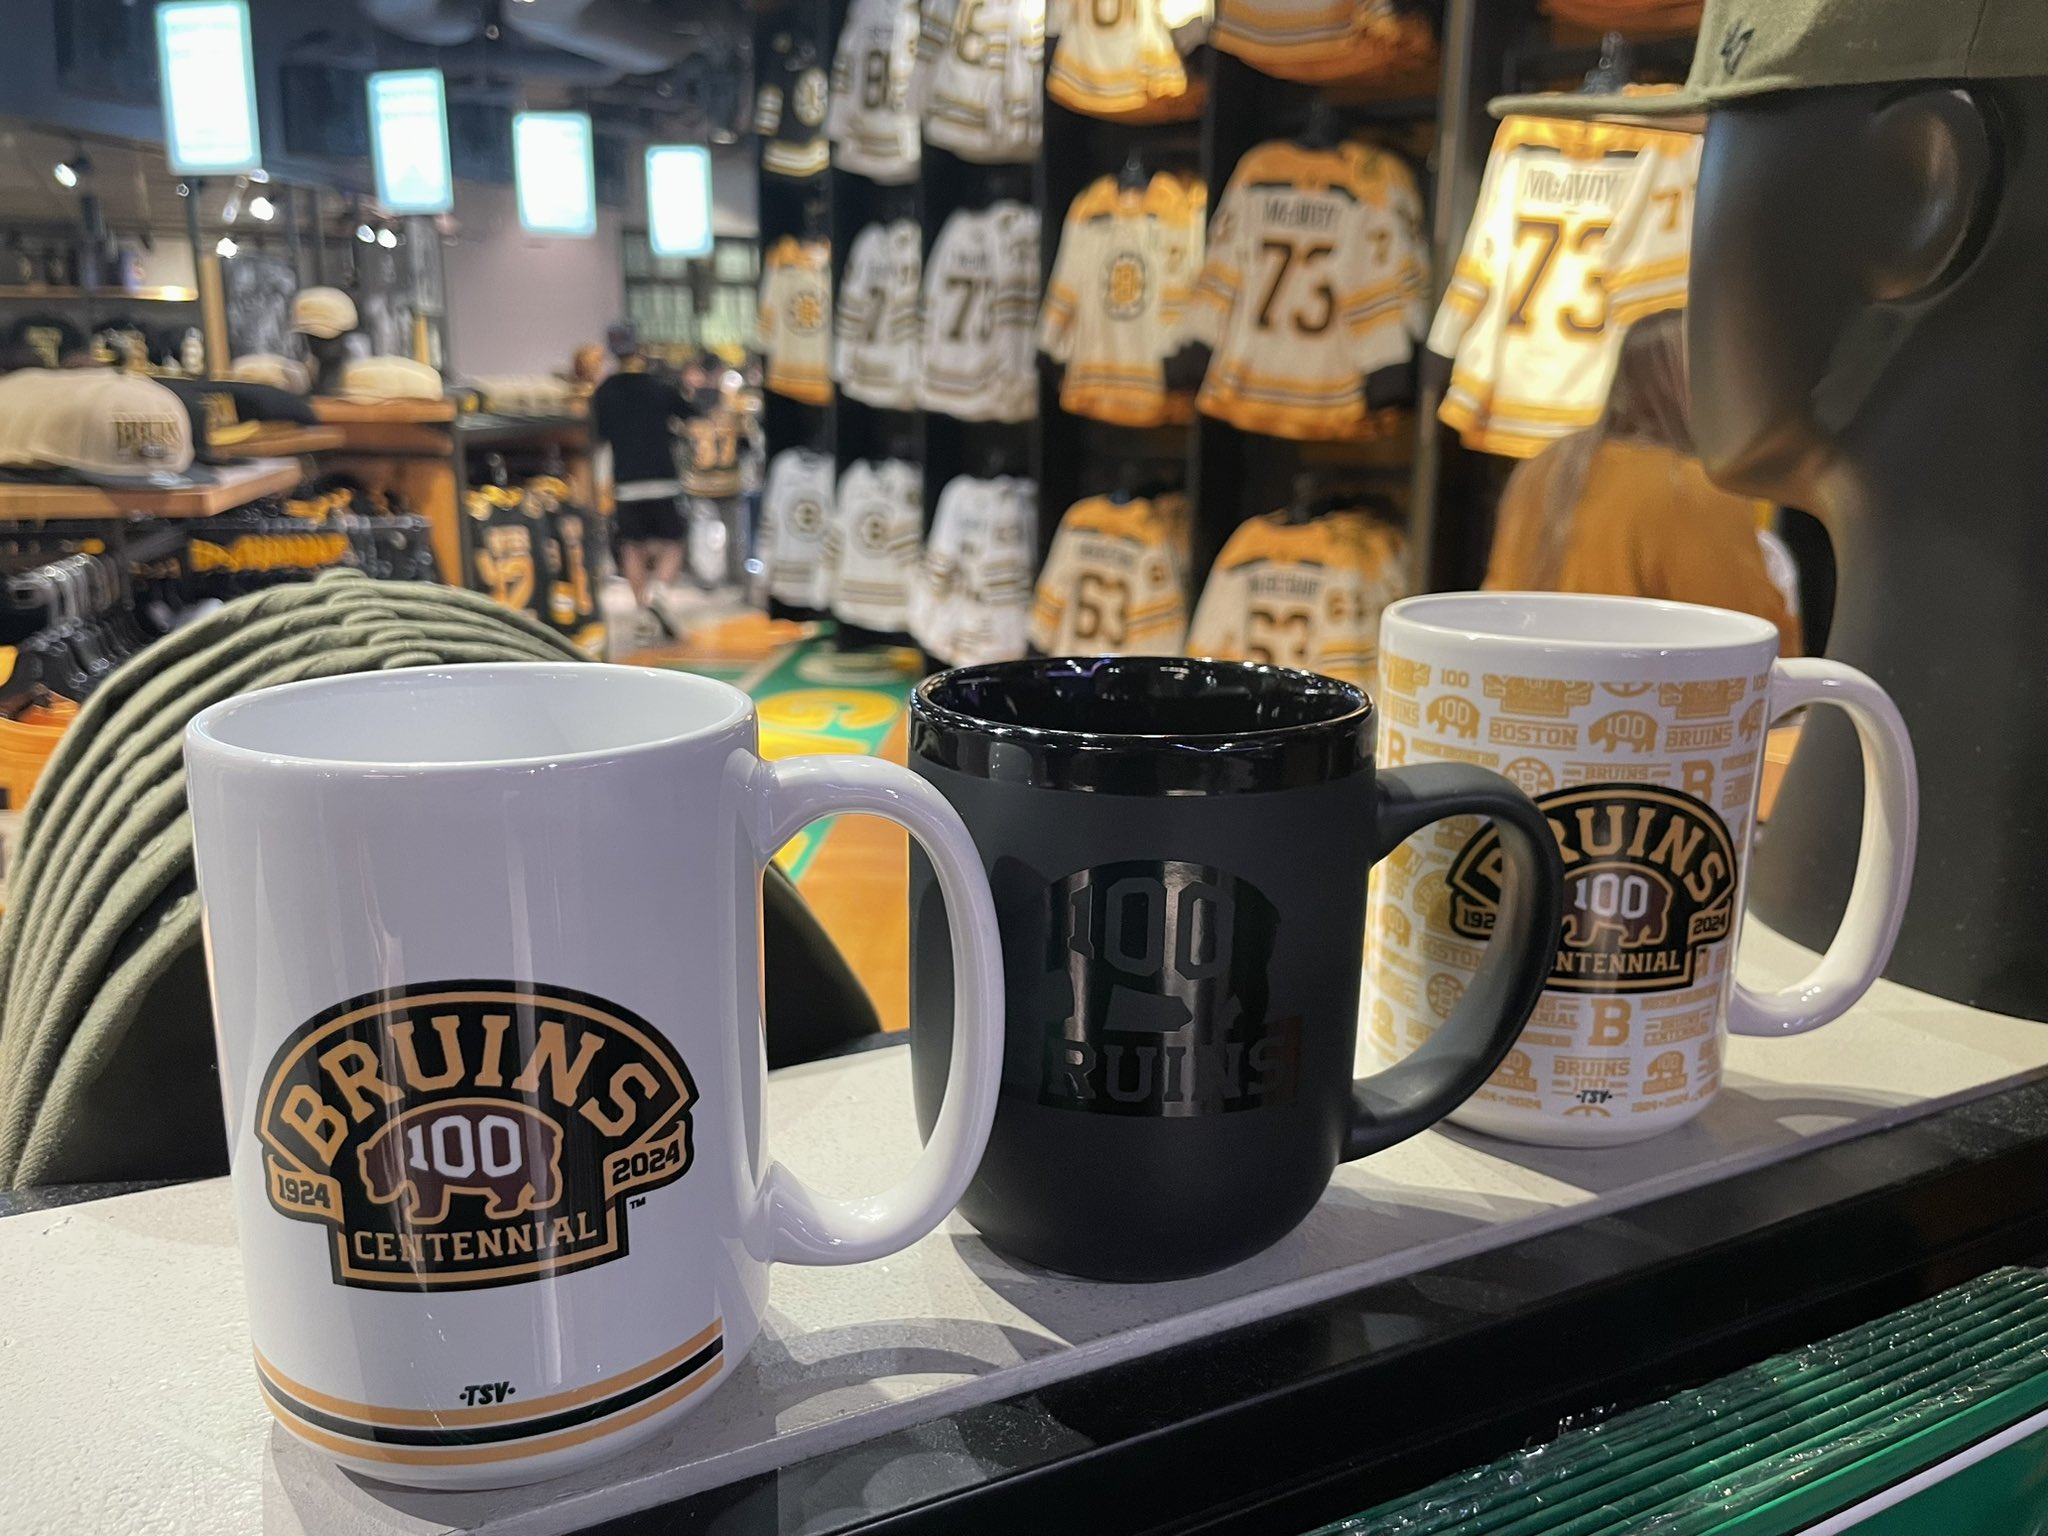 Boston ProShop - Heading to the Boston Celtics game at TD Garden tonight?  Stop by the Boston Pro Shop on Level 2 to pick up the perfect Mother's Day  gift.